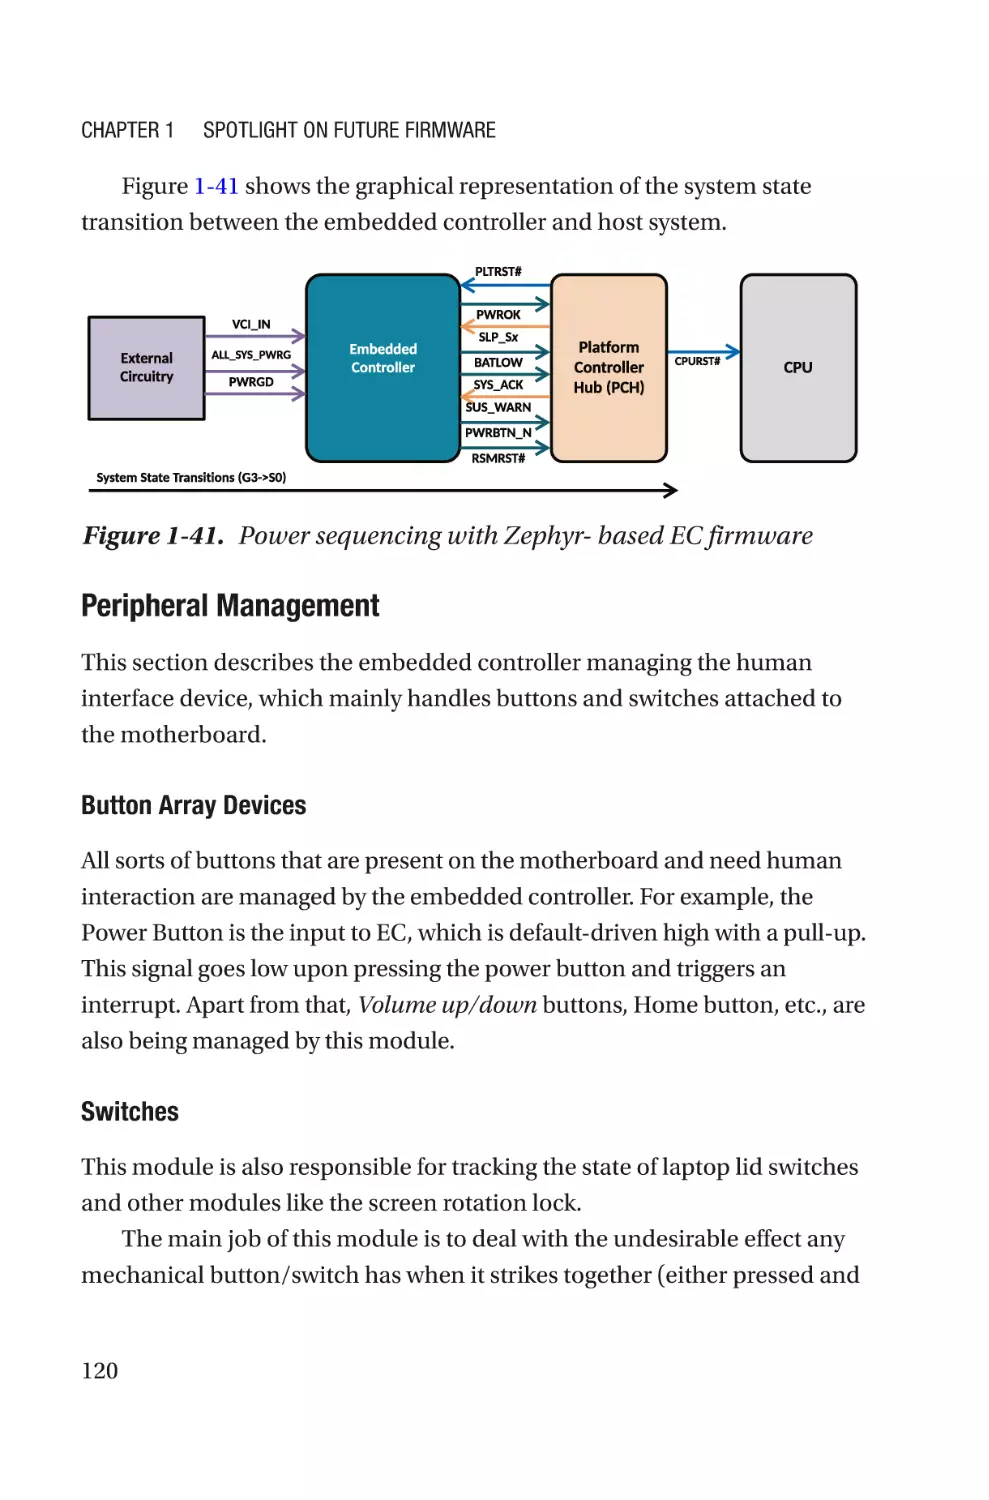 Peripheral Management
Button Array Devices
Switches